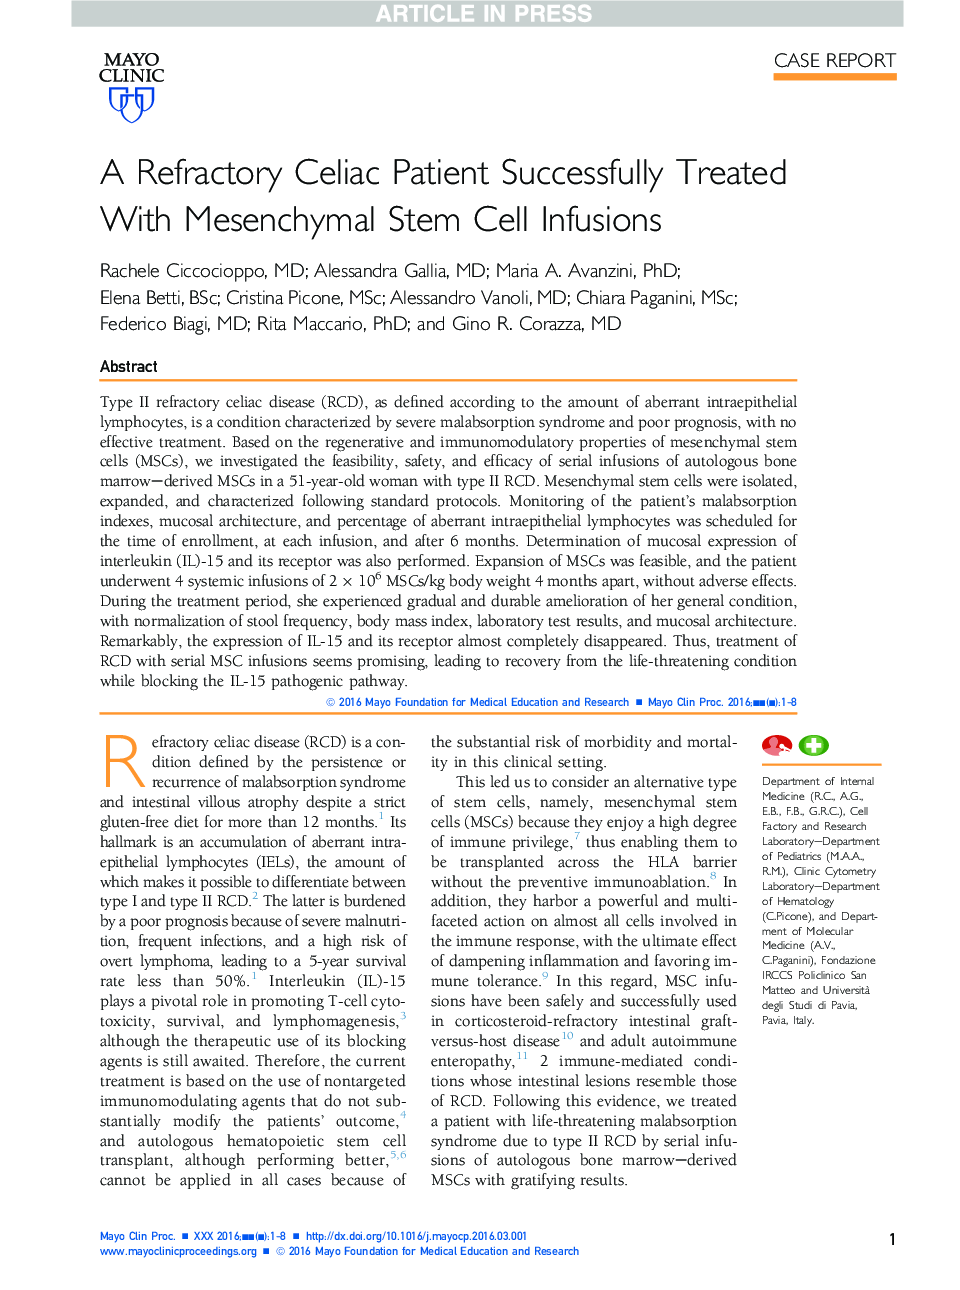 A Refractory Celiac Patient Successfully Treated With Mesenchymal Stem Cell Infusions